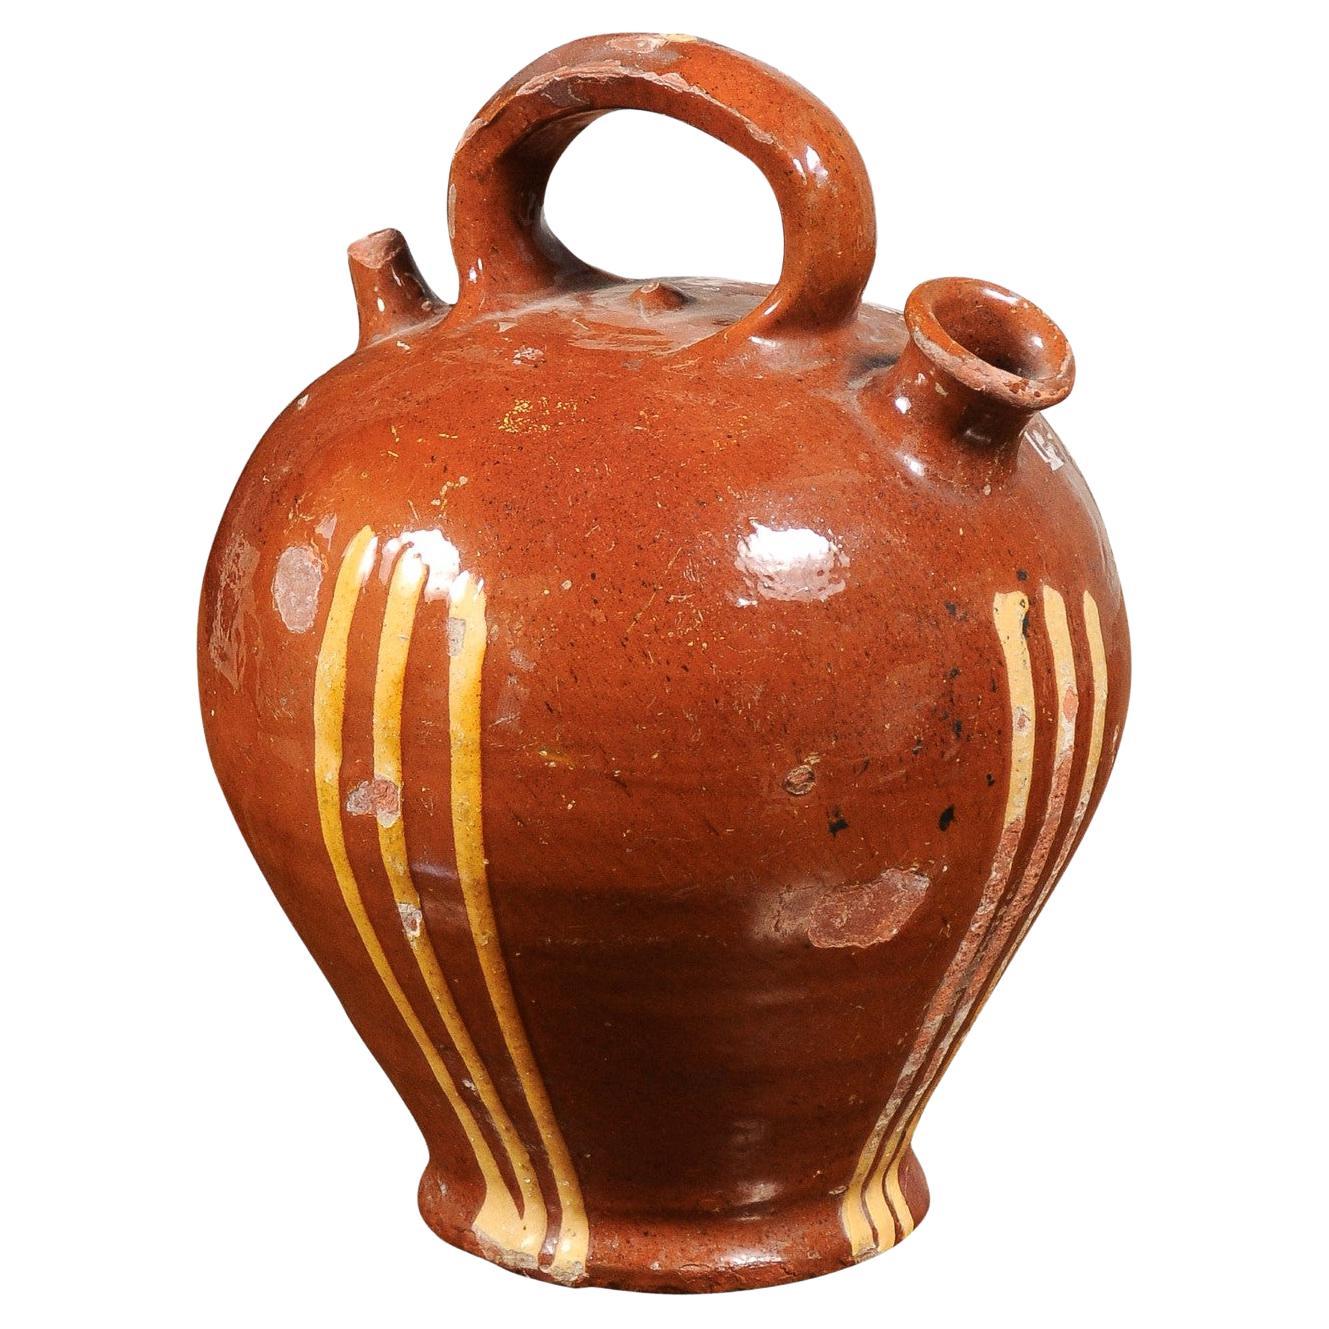 Rustic French 19th Century Pottery Jug with Russet Ground and Yellow Stripes